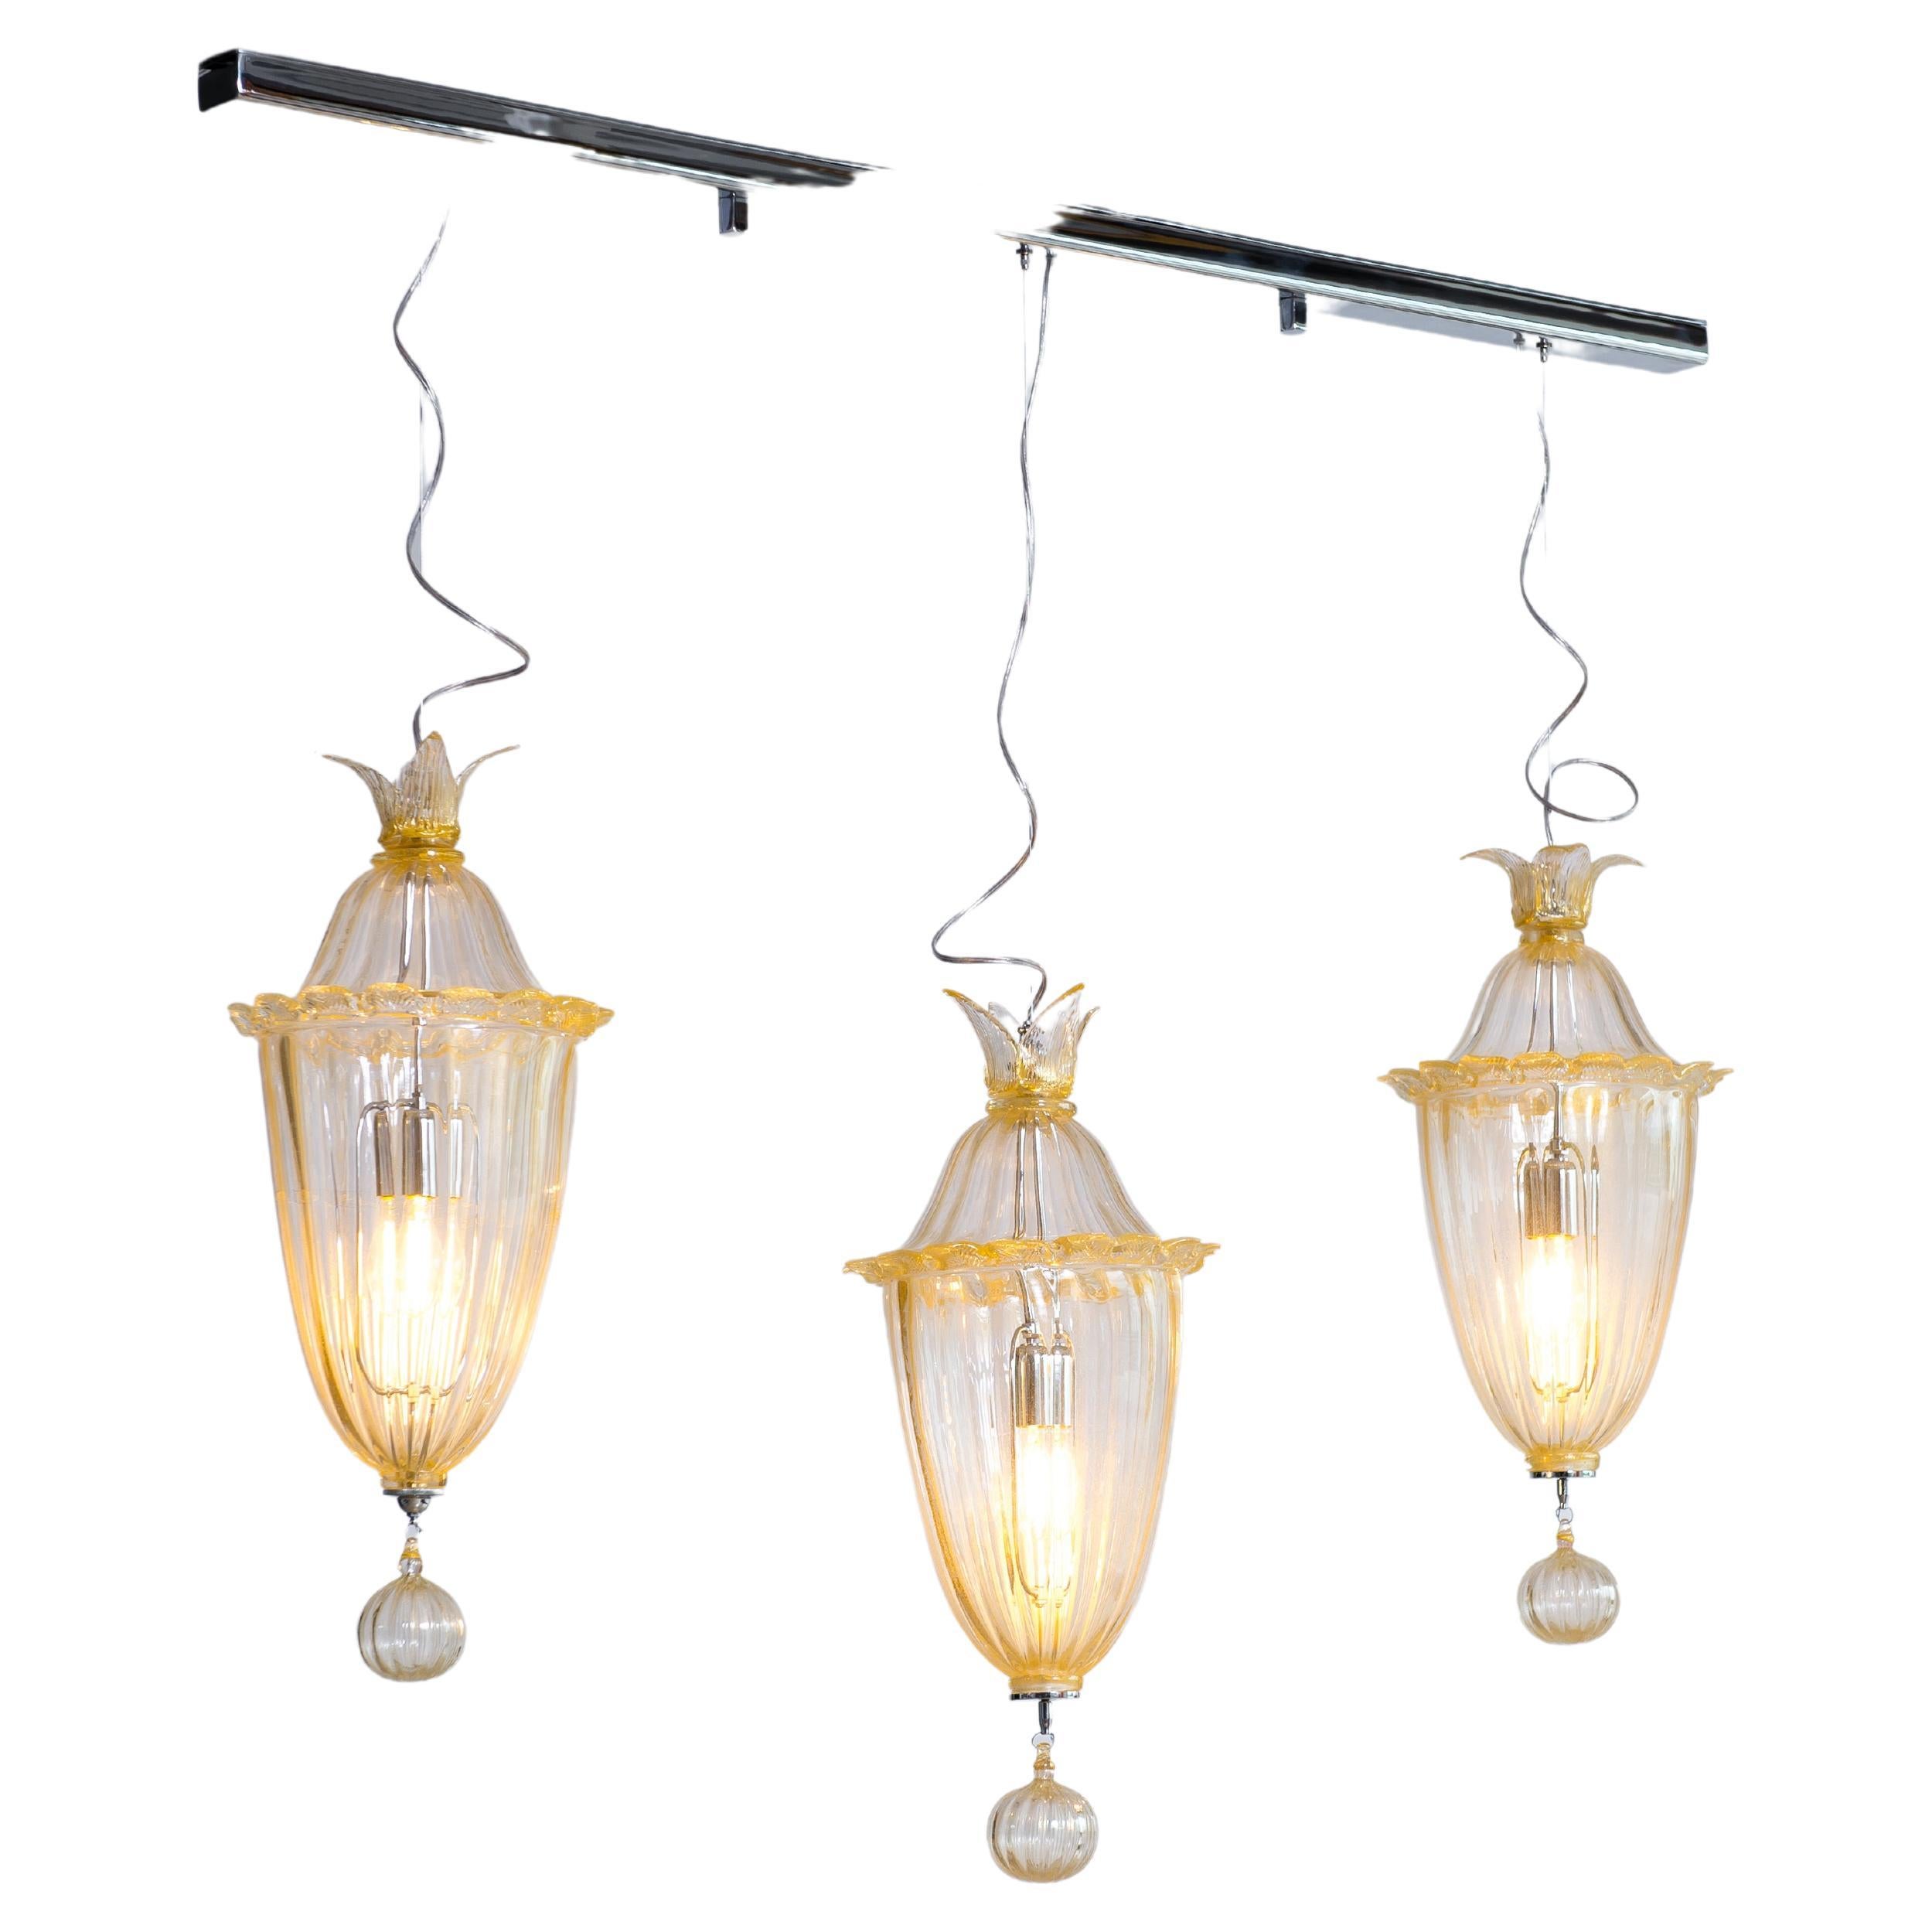 Suspension Lamp with Gold Finishes in blown Murano Glass Contemporary Italy
The chandelier holds three transparent Murano glass Cesendelli ( suspensions ) with gold finishes. The three Cesendelli are set at two different heights, and fixed to the